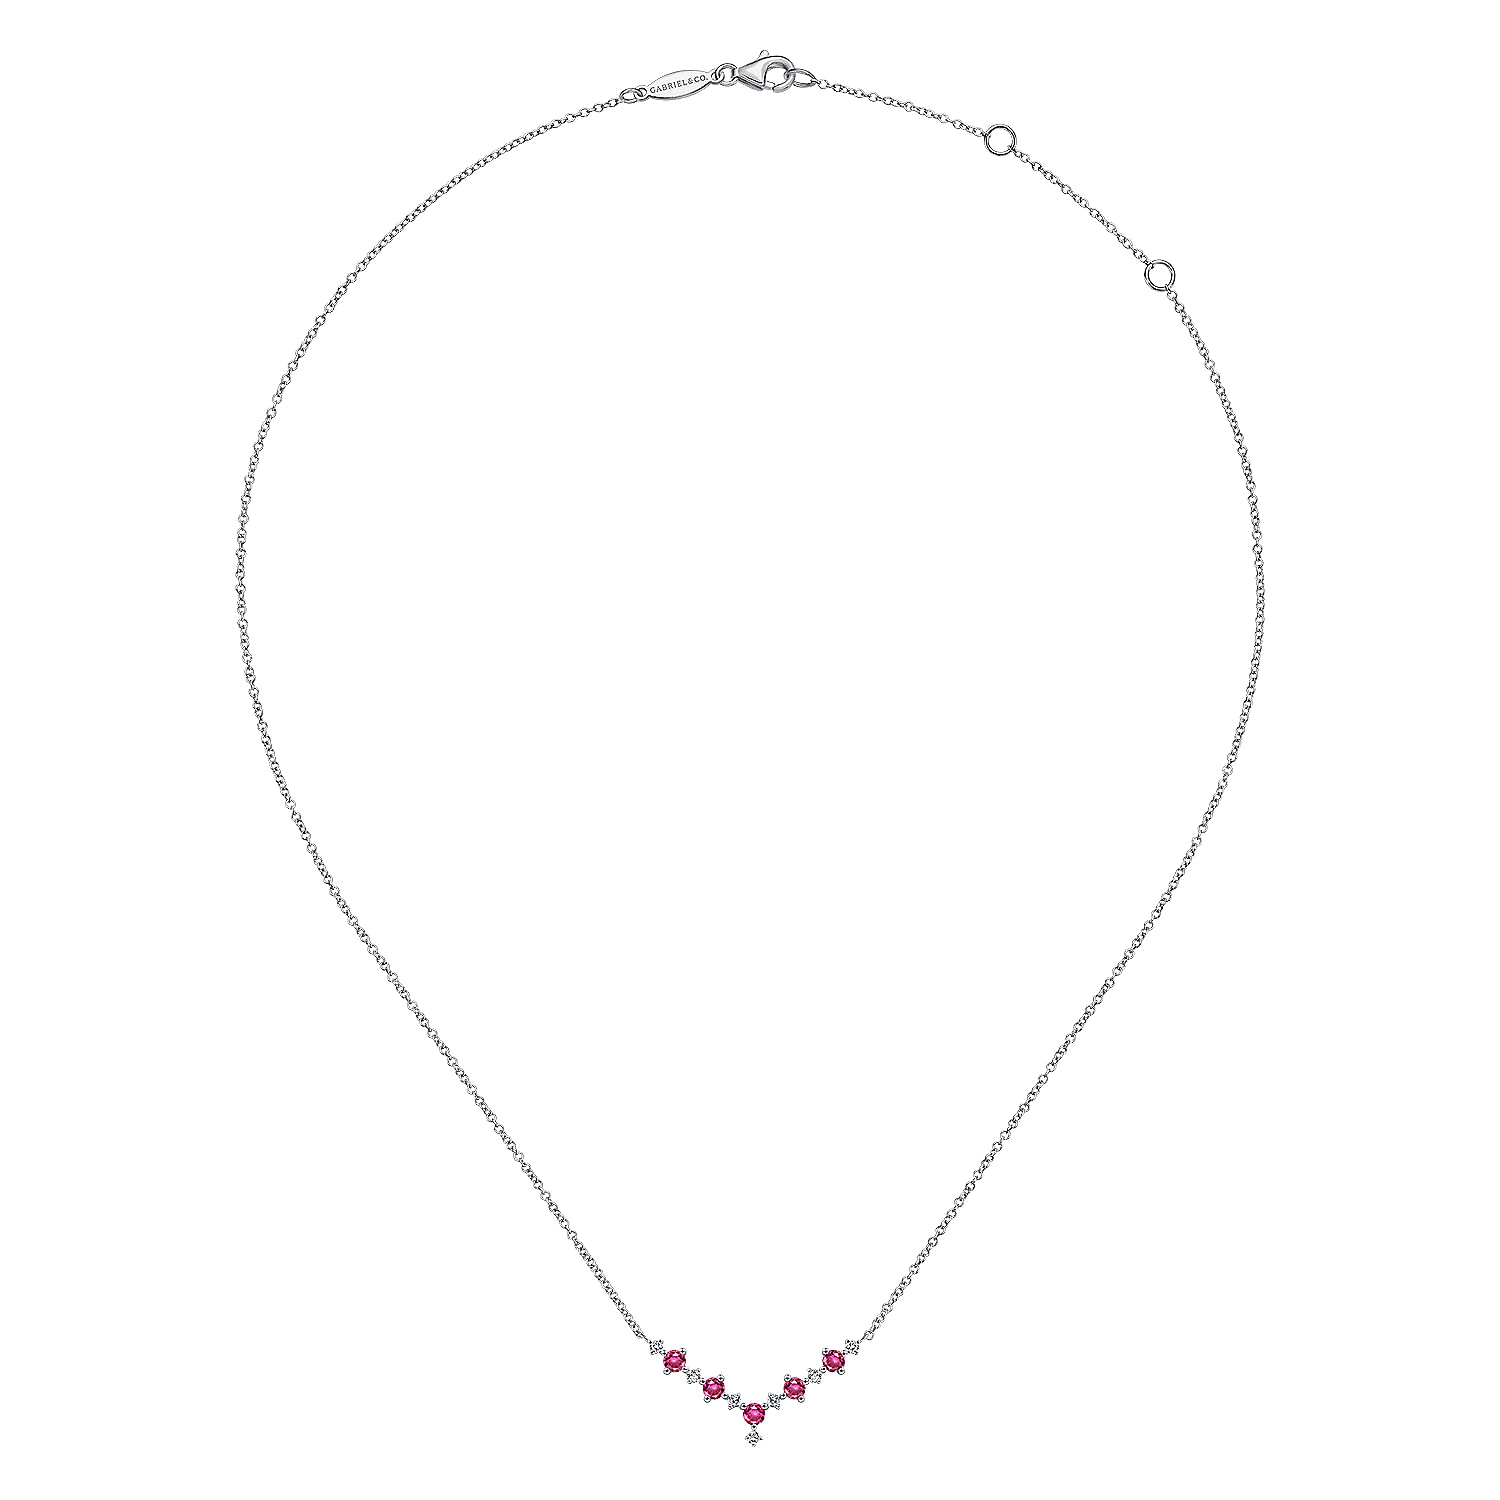 14K White Gold Diamond and Ruby Curved Bar Necklace